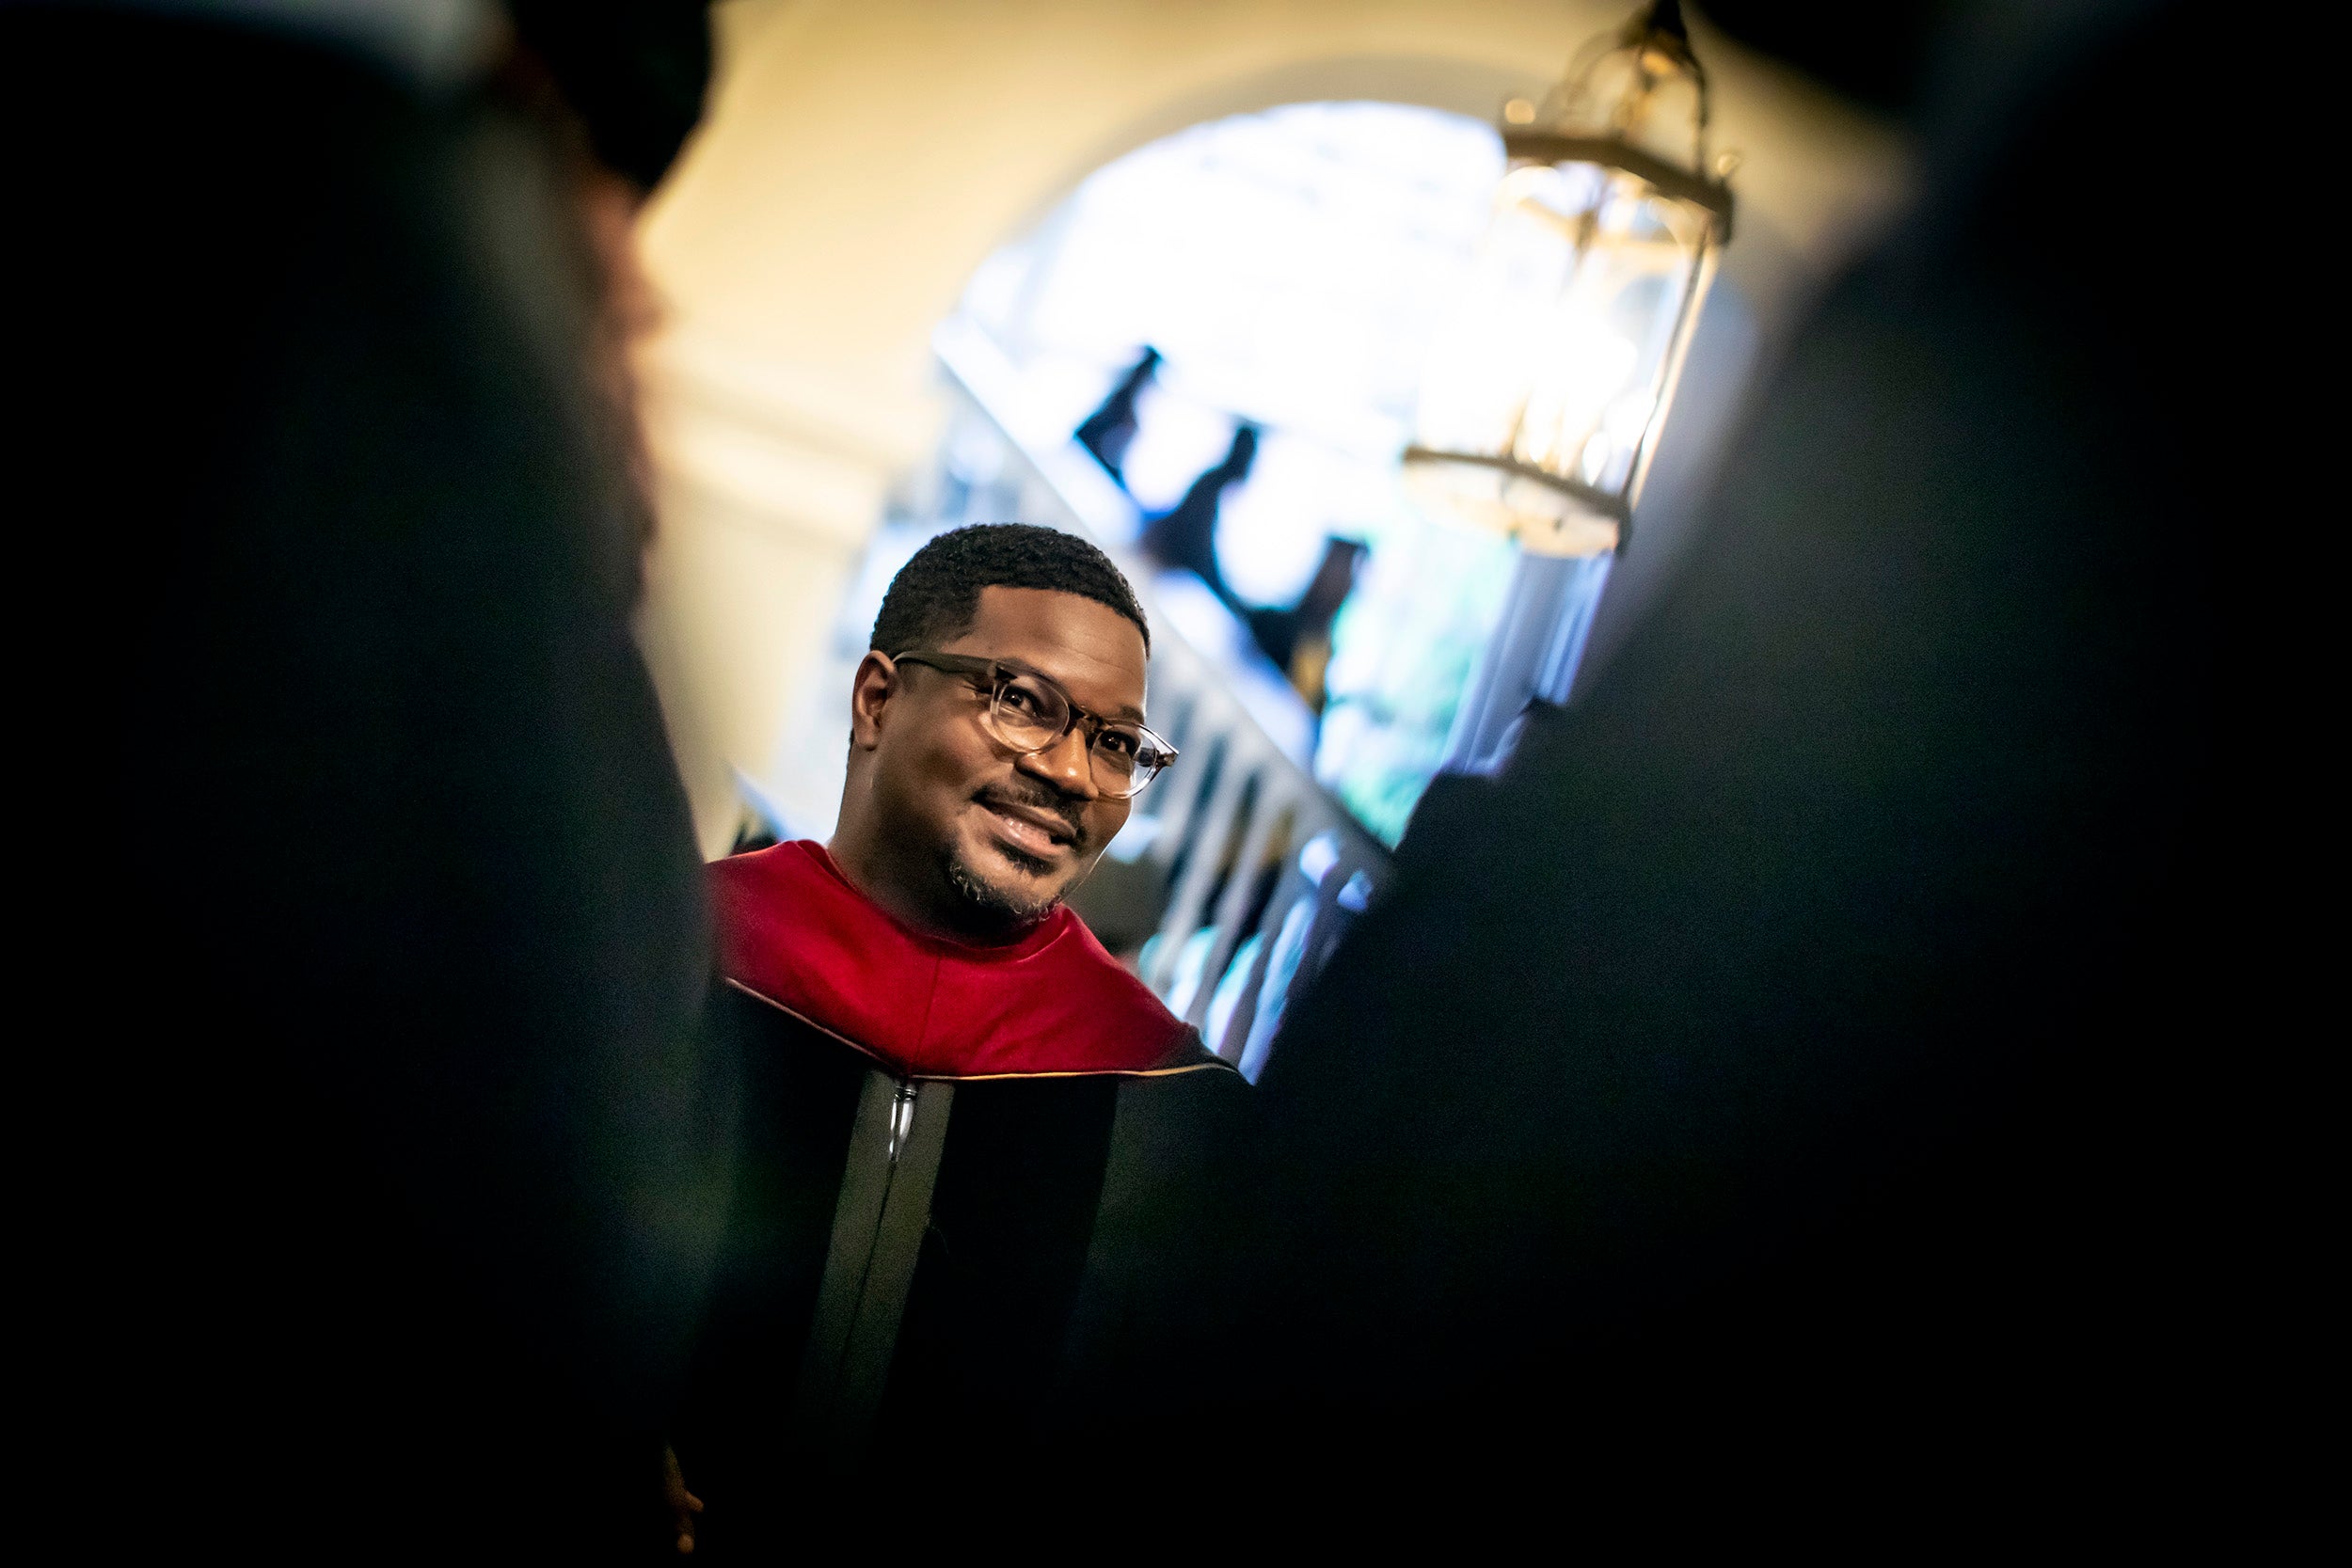 Johnathan Walton in Memorial Church during the Baccalaureate Service.